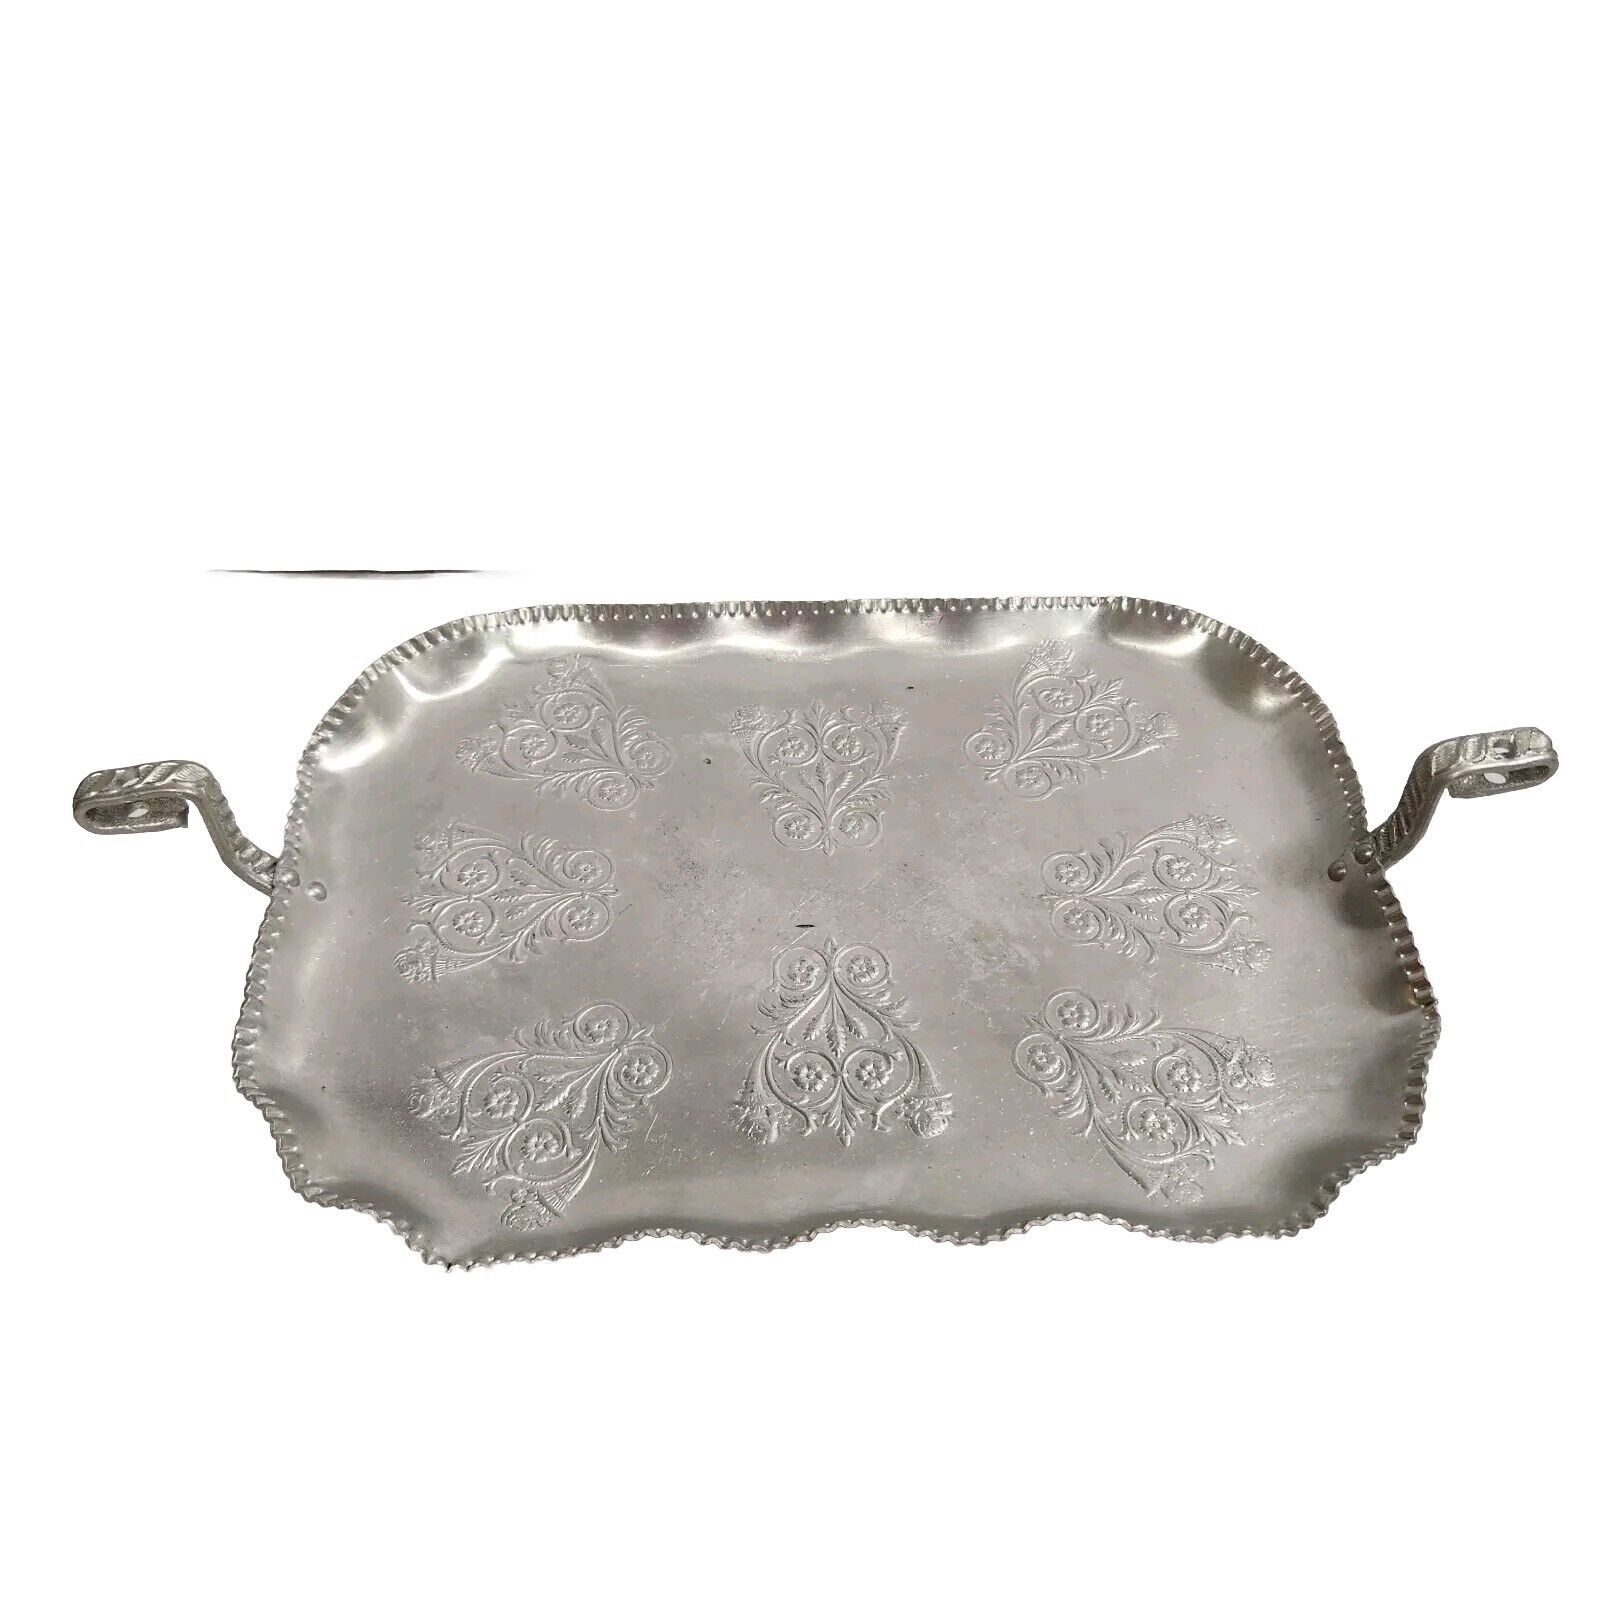 Vintage Aluminum Serving Tray With Handles Floral Design 